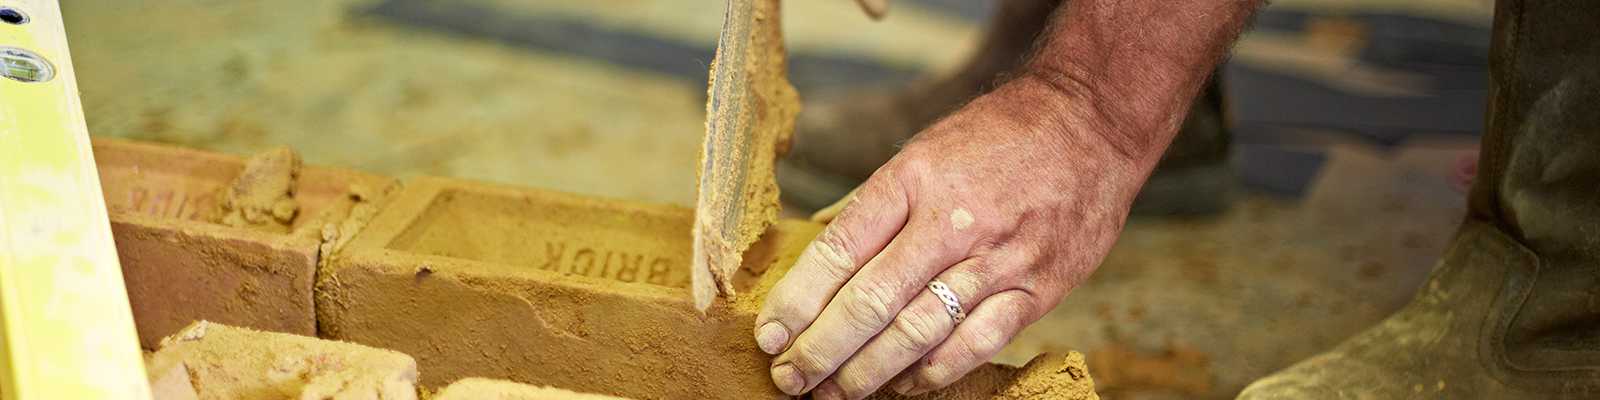 City & Guilds Bricklaying Course